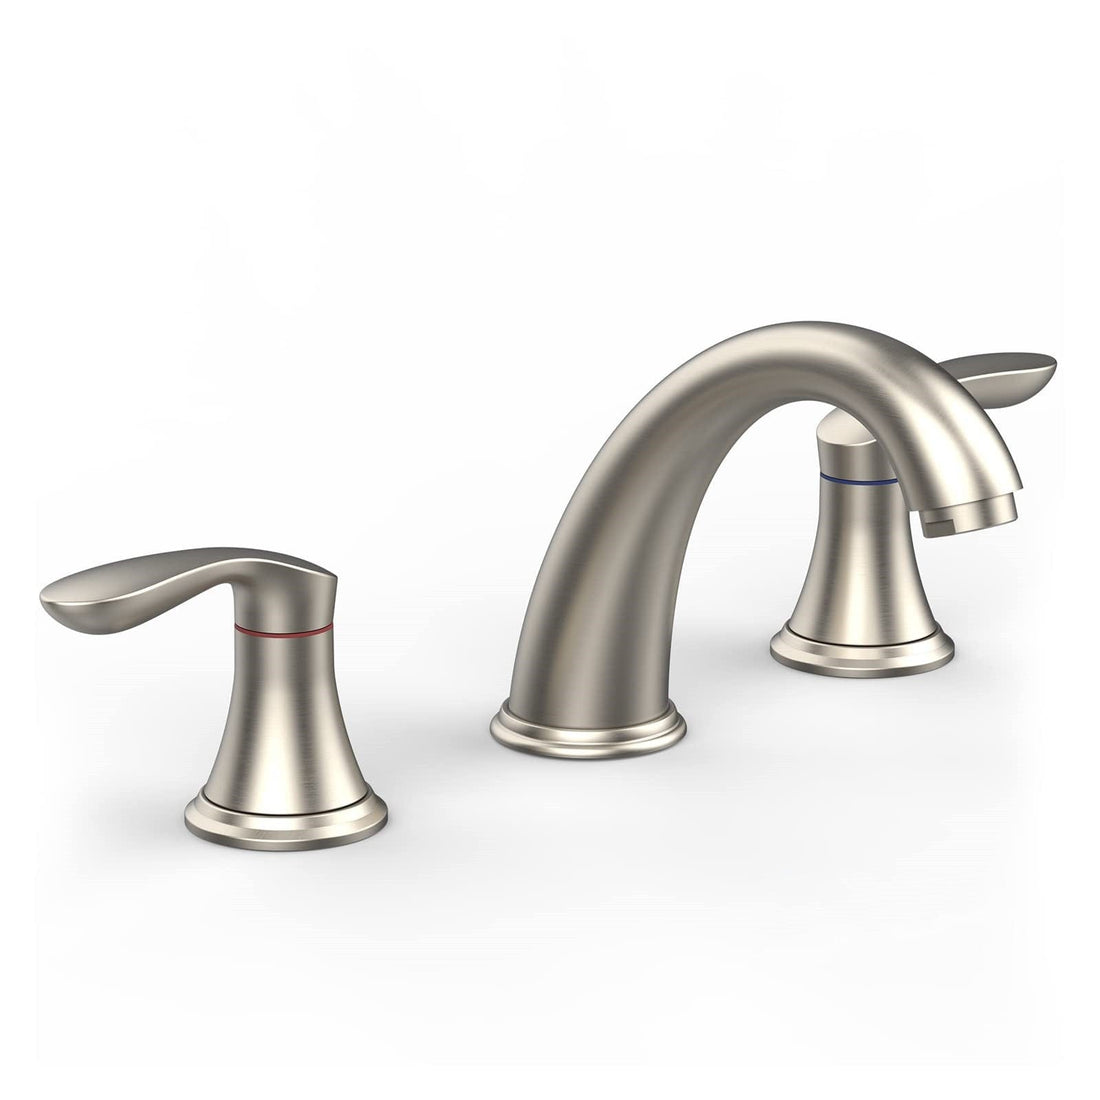 3 Hole Bathroom Sink Faucet, Pop-Up Drain, Hot/Cold Lines(8 Inch 1 Pack / Brushed Nickel)